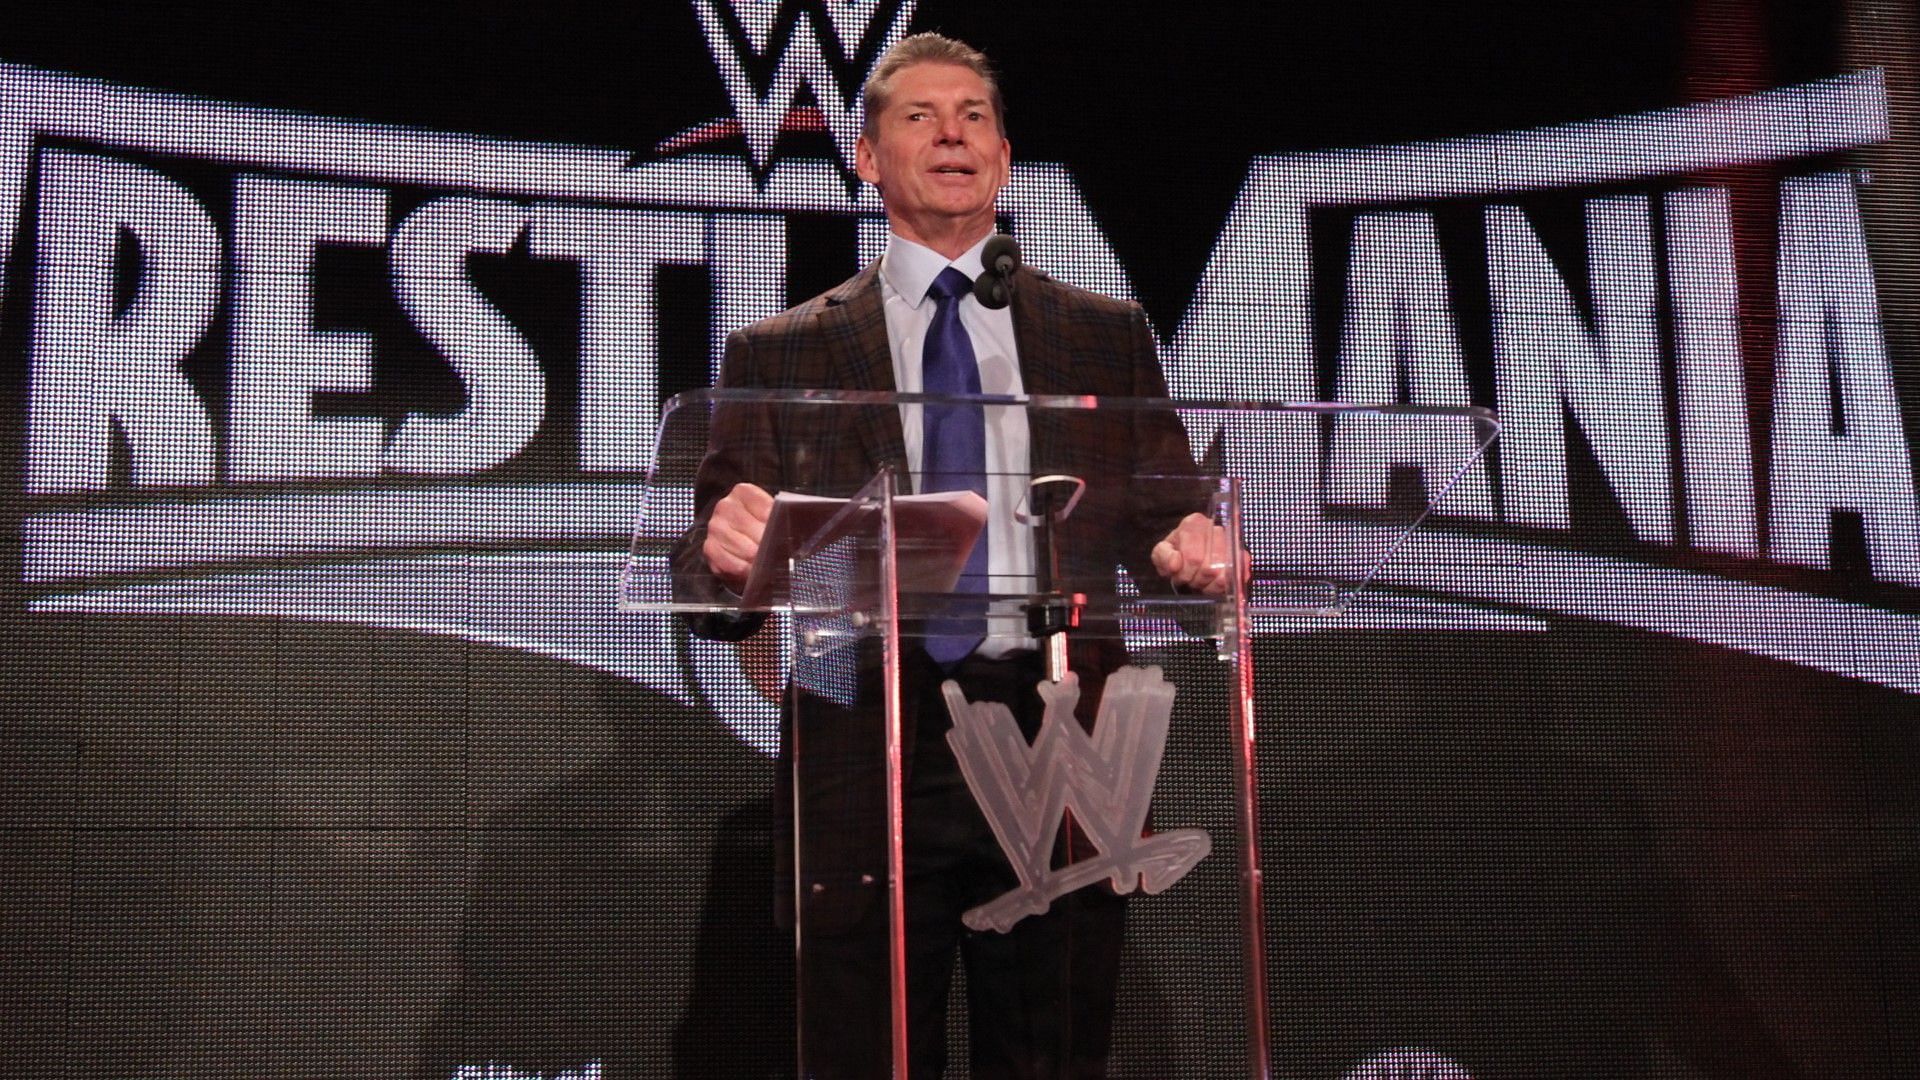 Former WWE boss Vince McMahon speaks at the WrestleMania 31 press conference